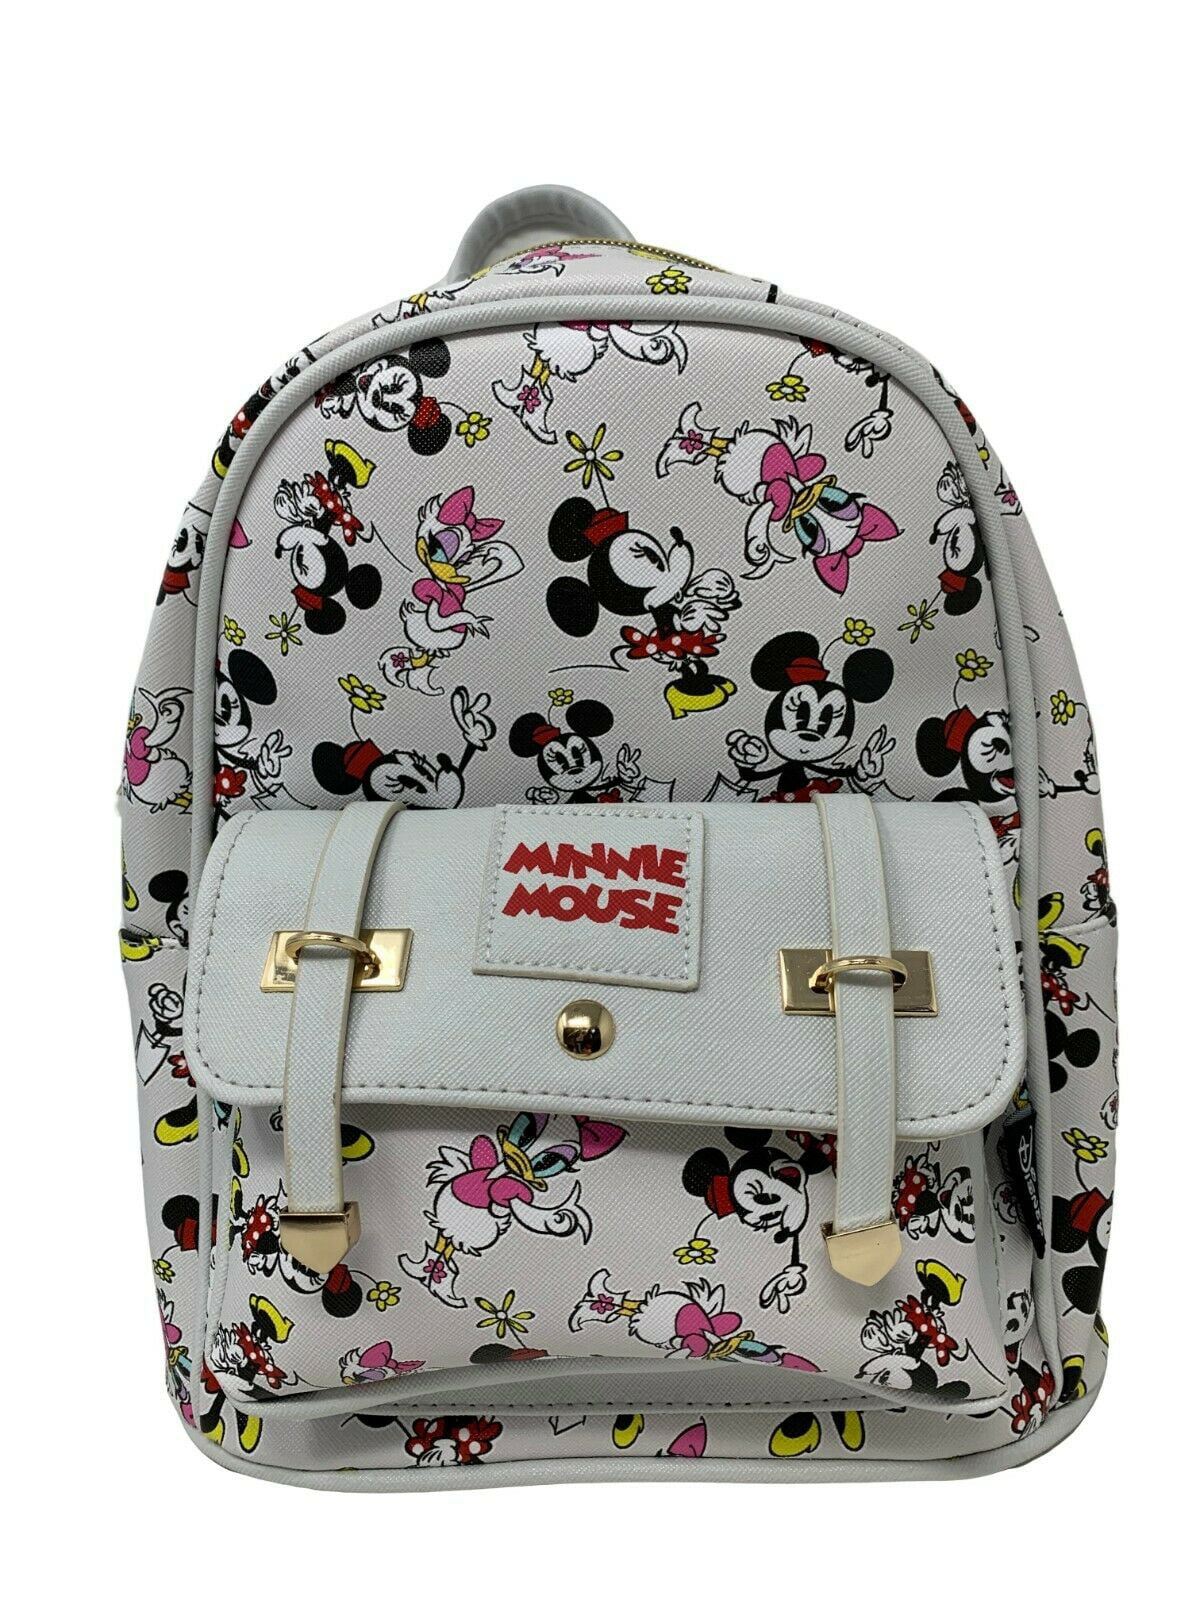 Licensed - Disney Minnie Mouse 11